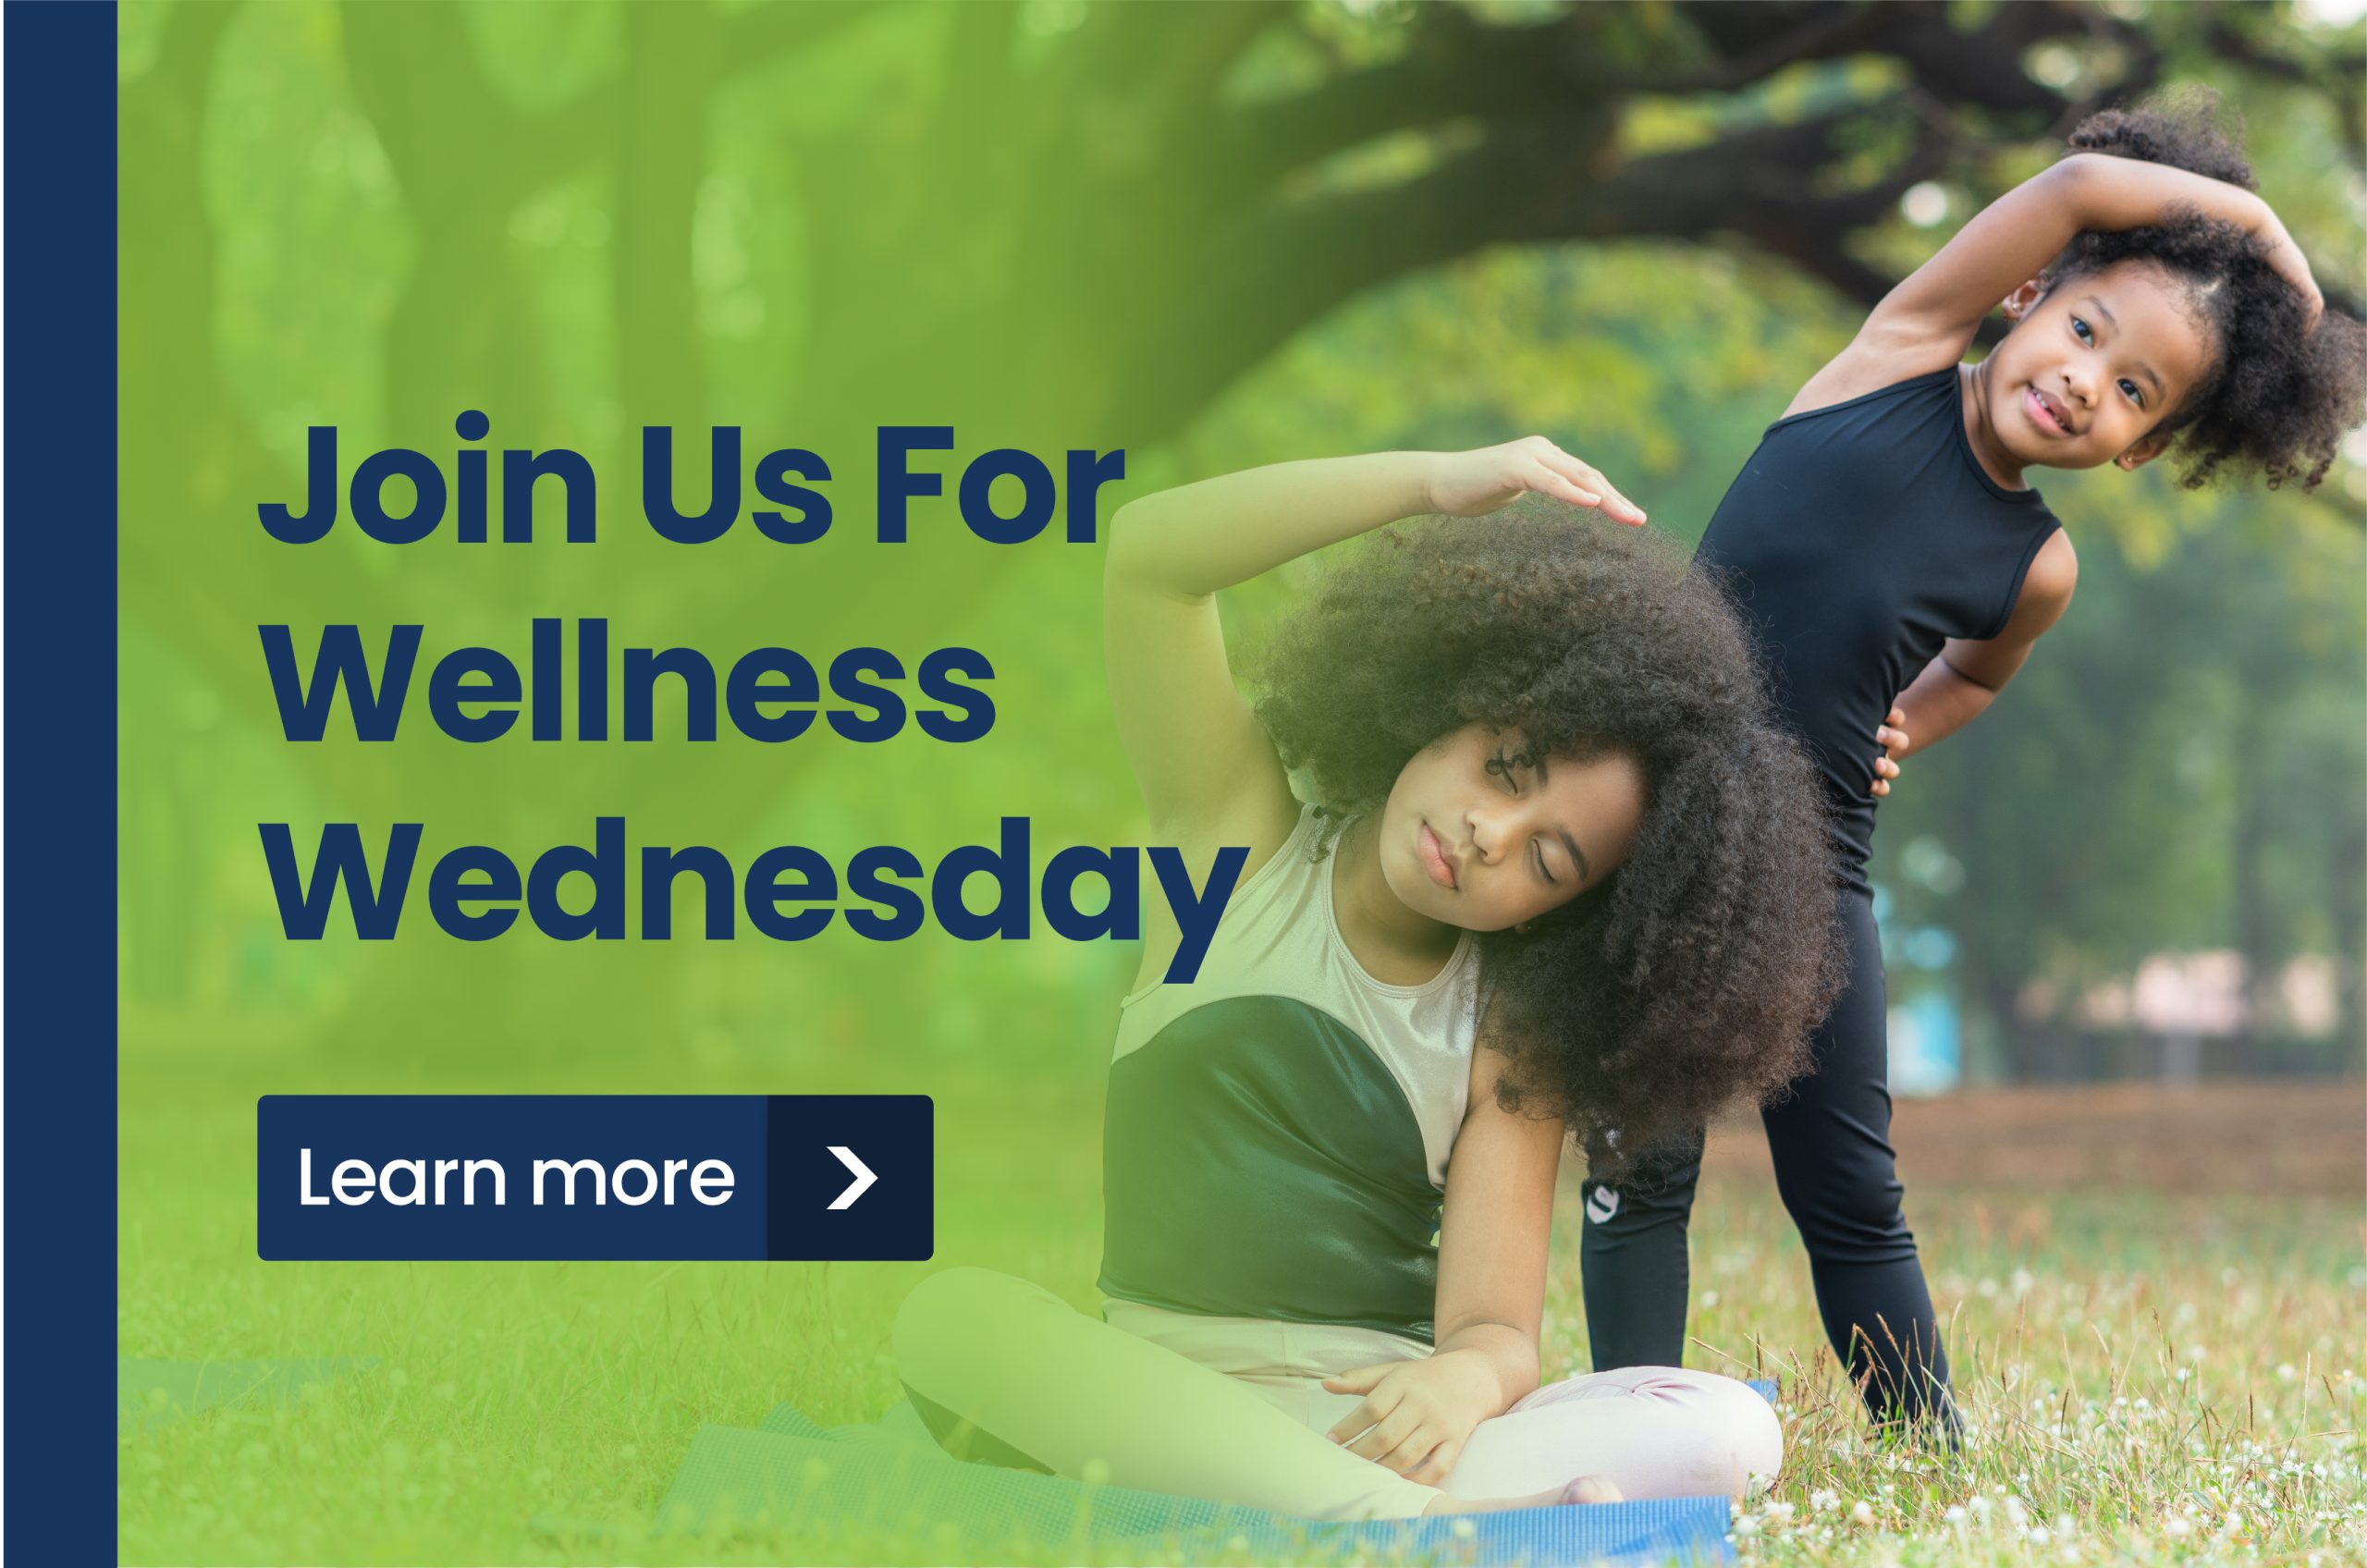 Join us for Wellness Wednesday